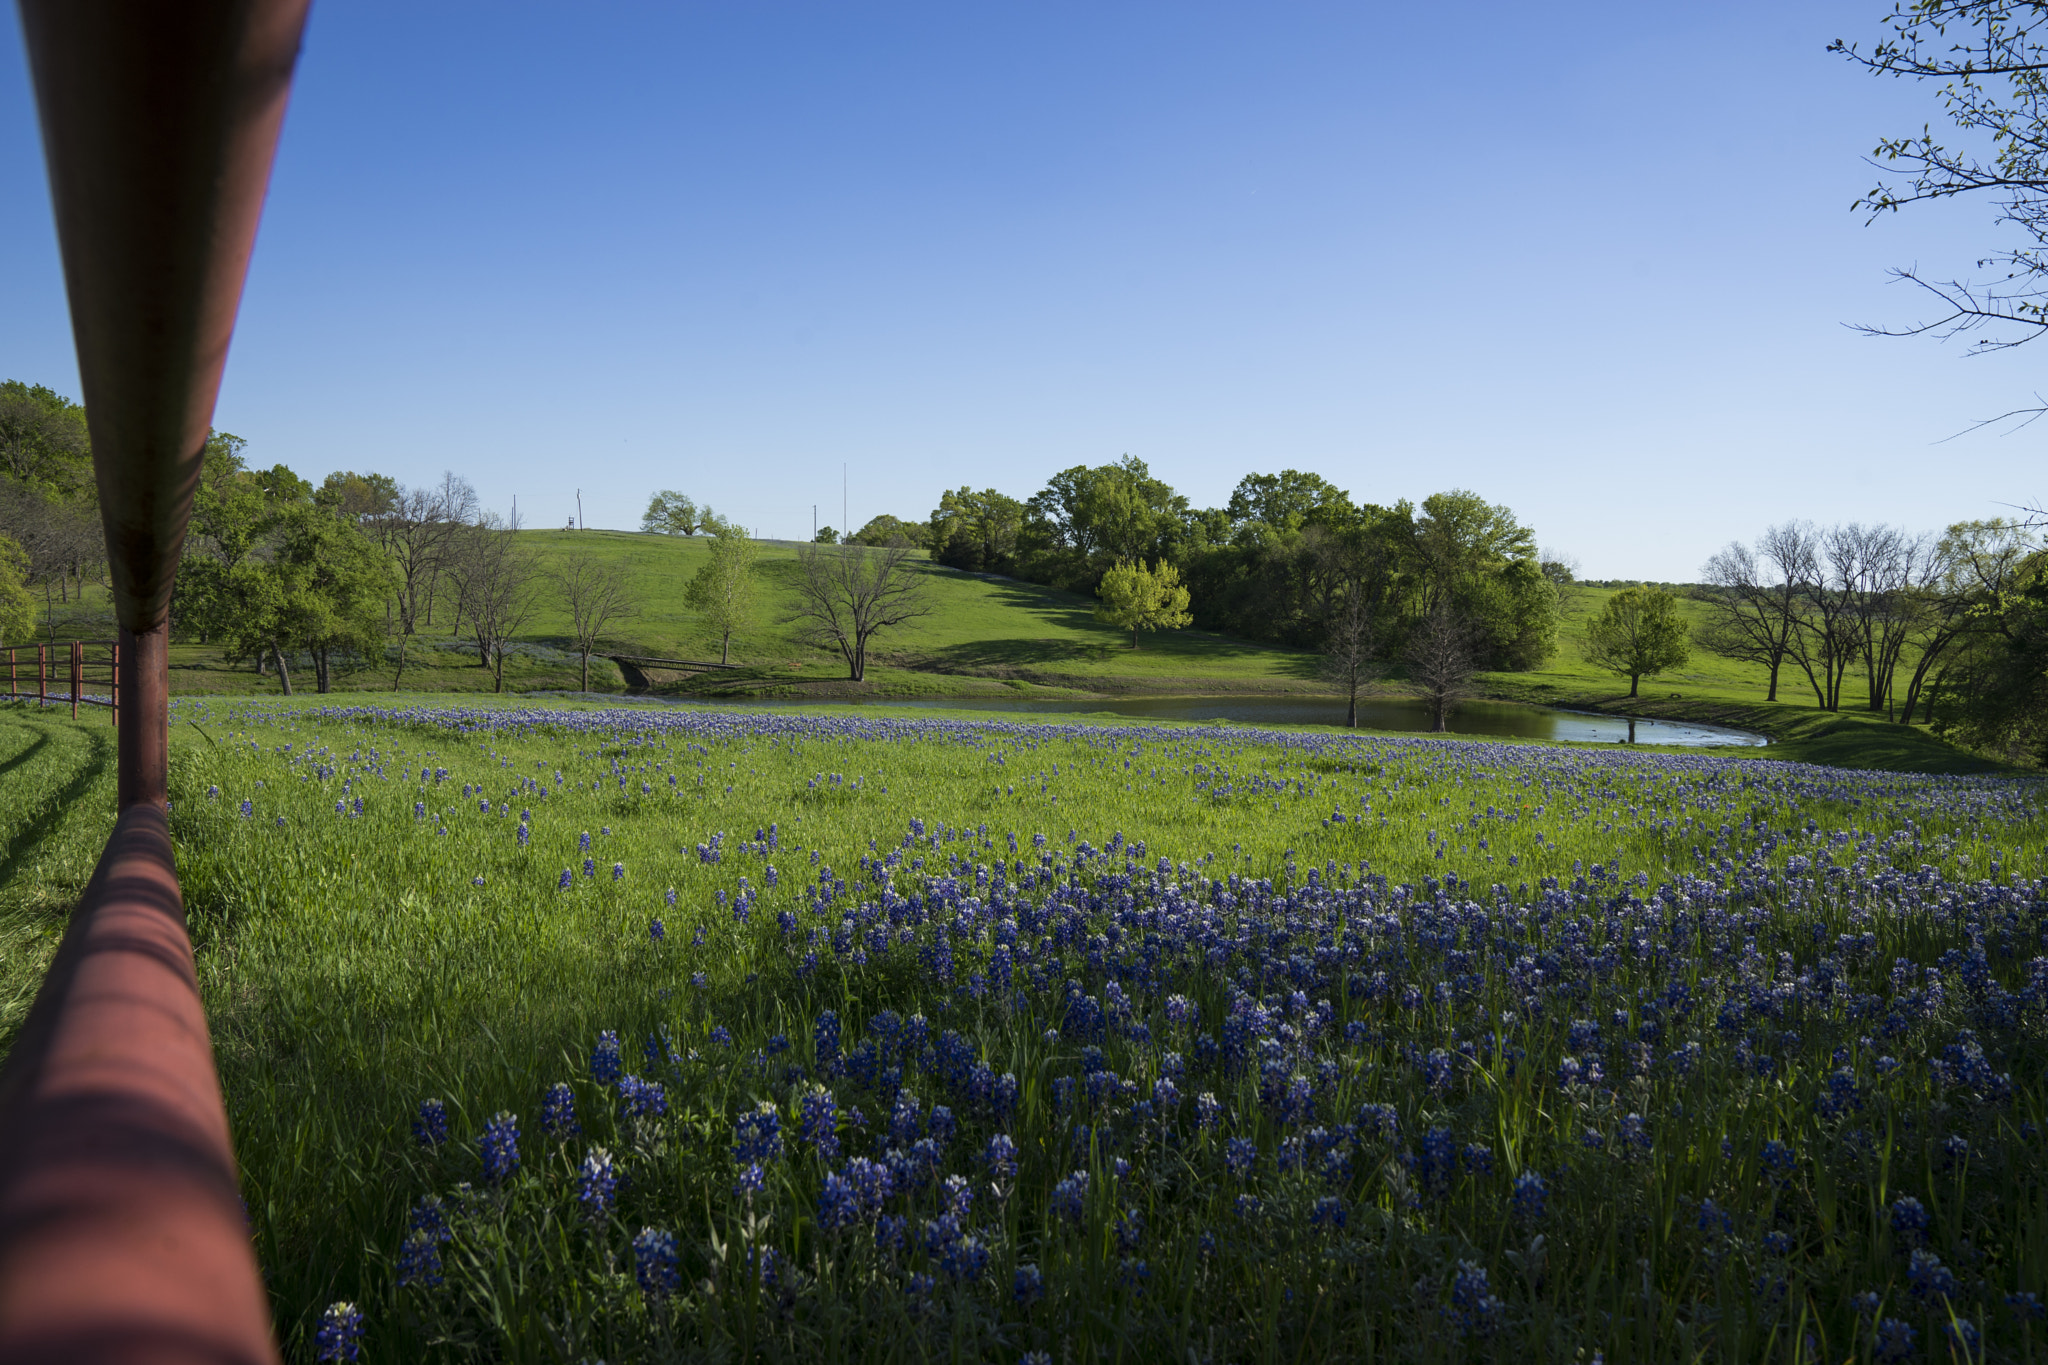 Sony a7 II sample photo. Bluebonnets in bloom photography